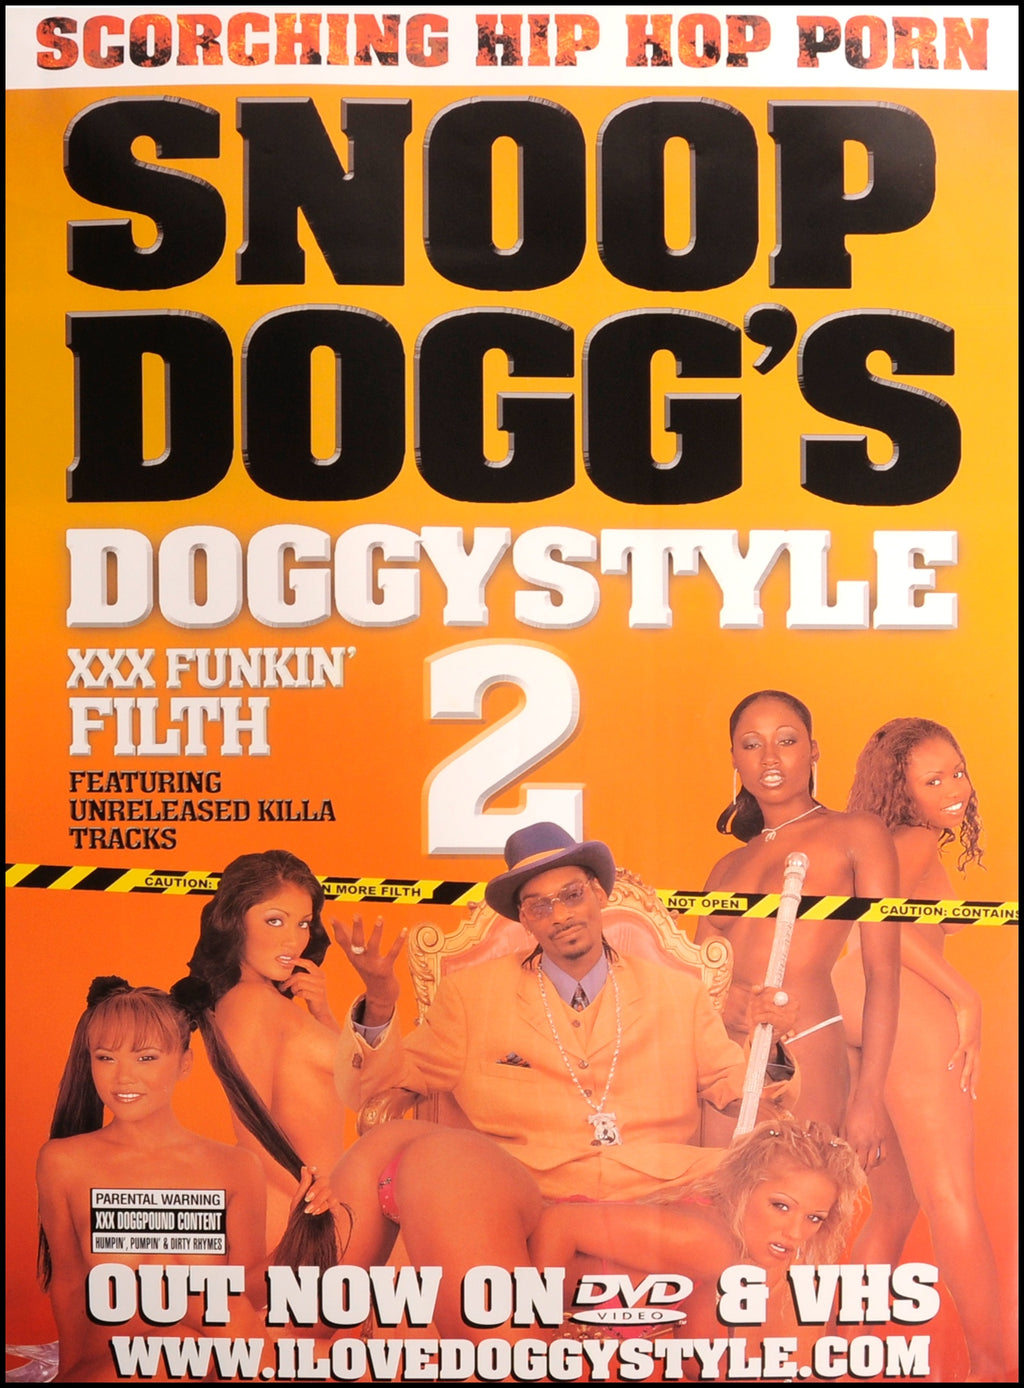 Snoop Dogg poster - Doggy Style 2. Original